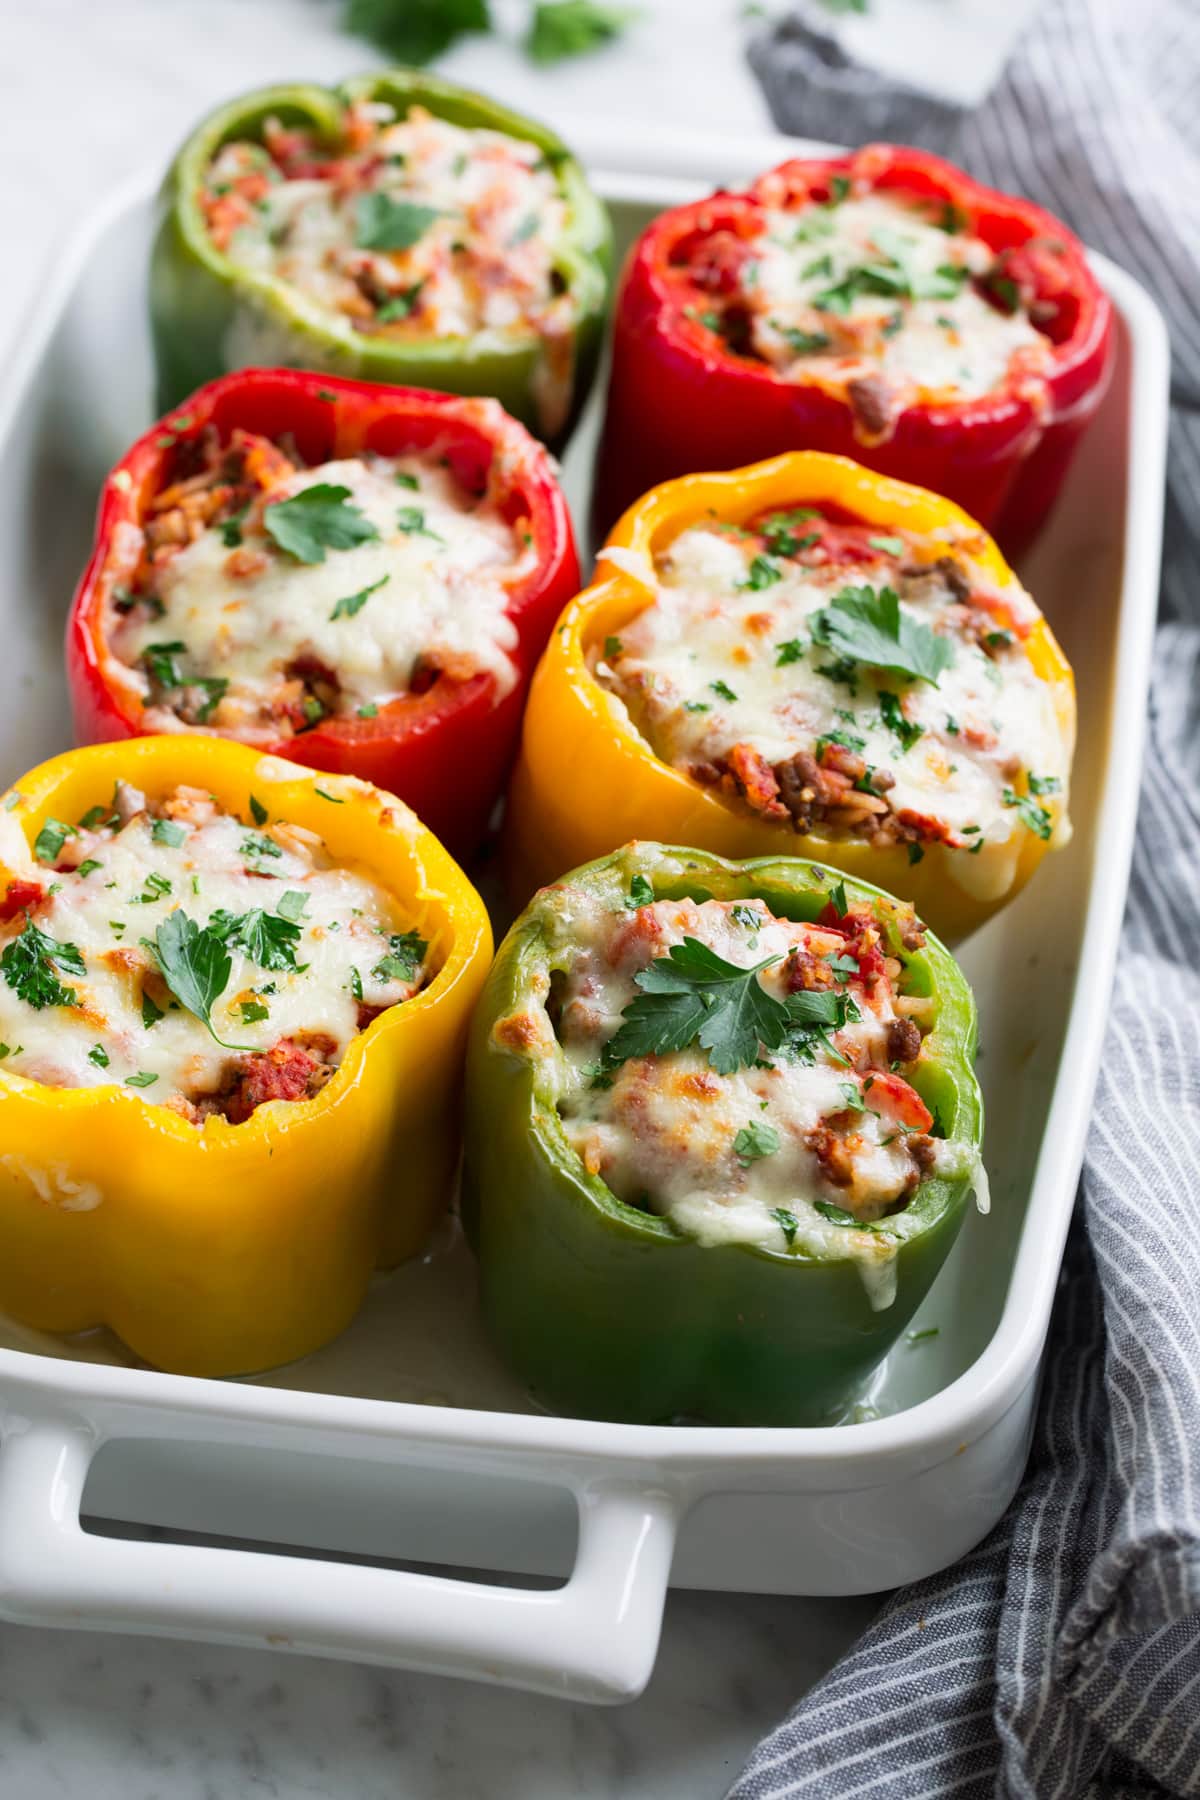 Multi-color stuffed peppers in a white baking dish.